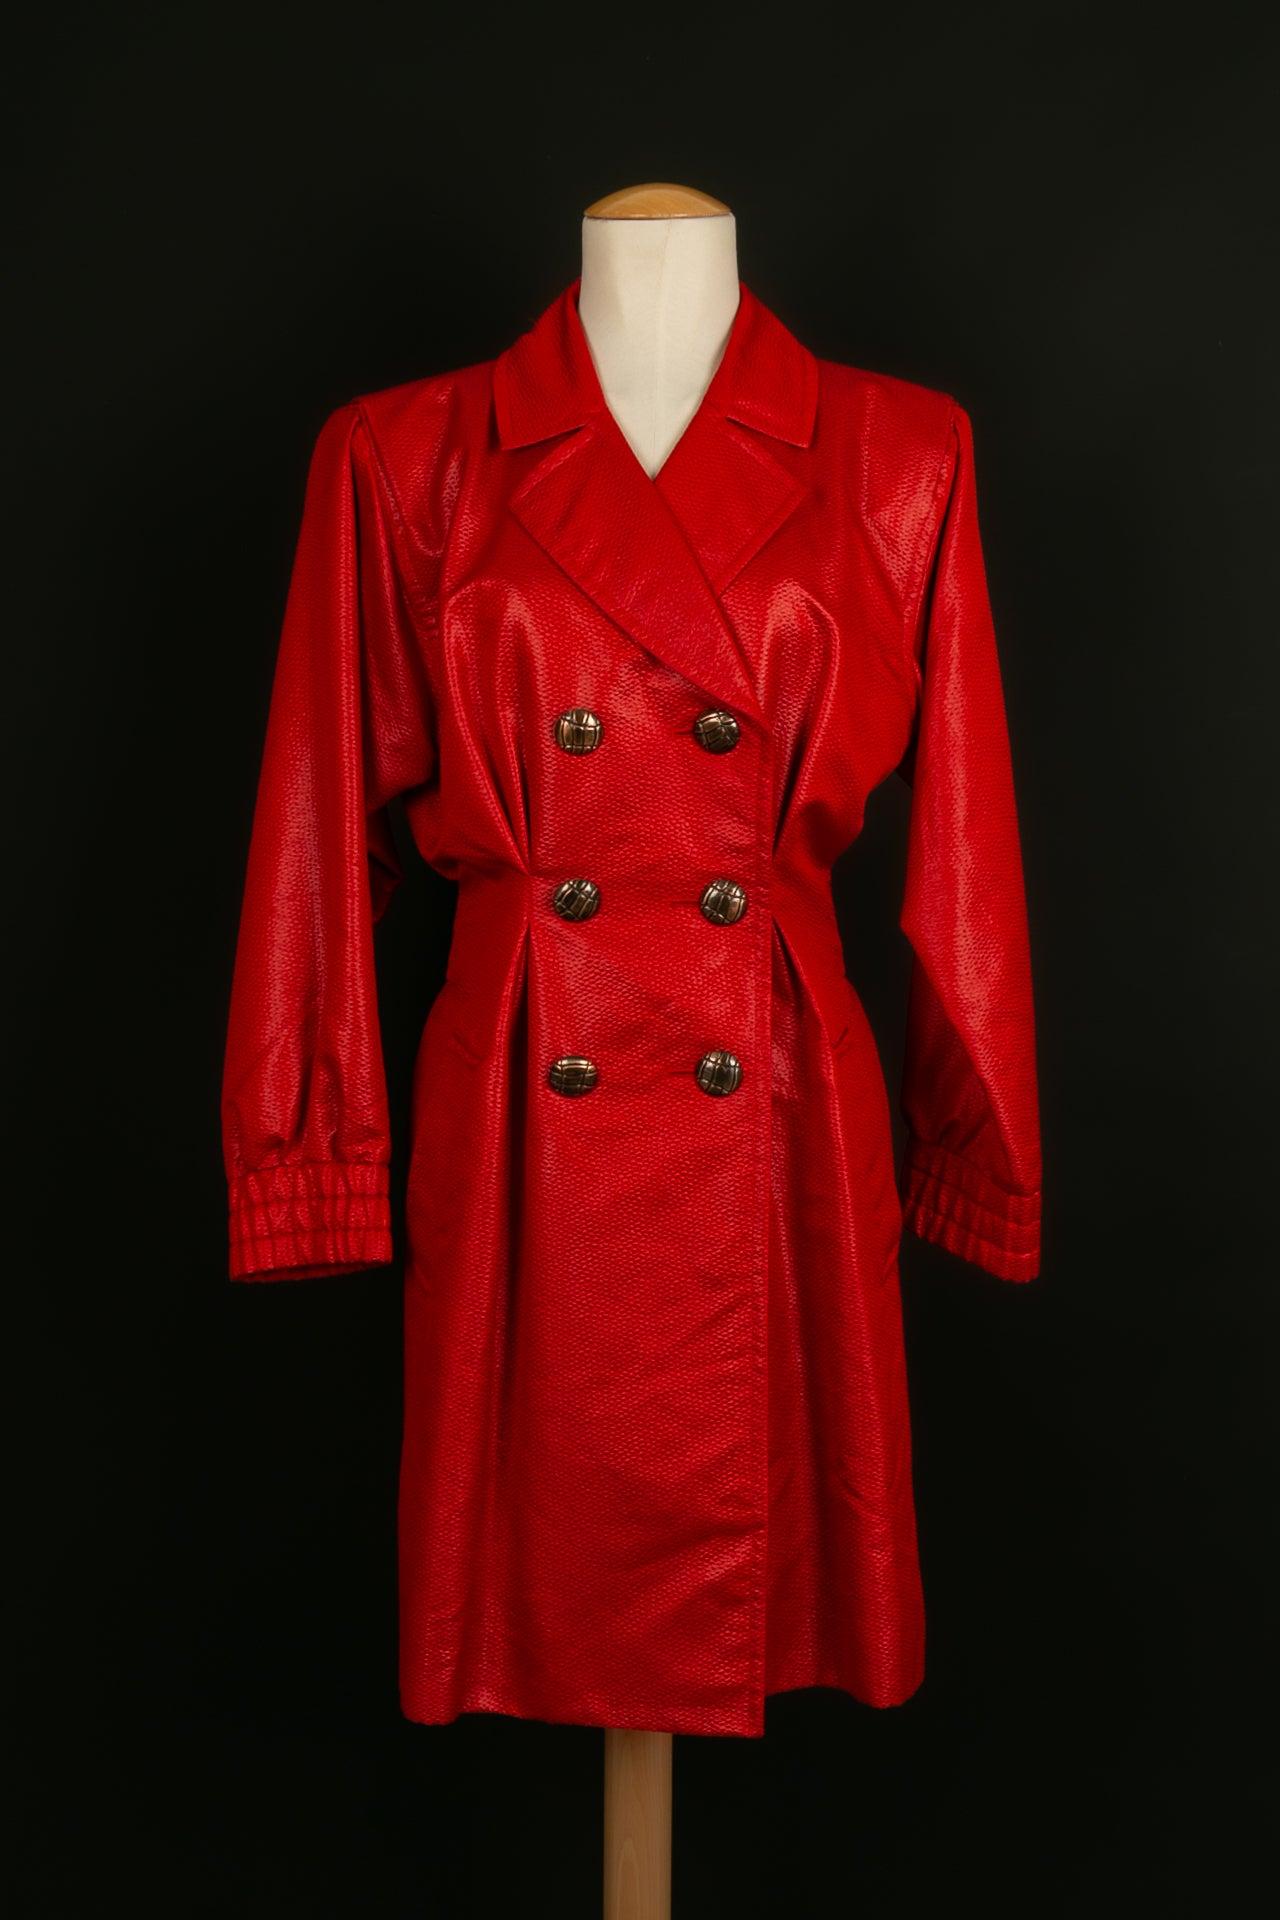 Yves Saint Laurent - (Made in France) Trench coat in red fabric. Size 36FR.

Additional information: 
Dimensions: Shoulder width: 47 cm, Sleeve length: 60 cm, Length: 96 cm
Condition: Very good condition
Seller Ref number: M26